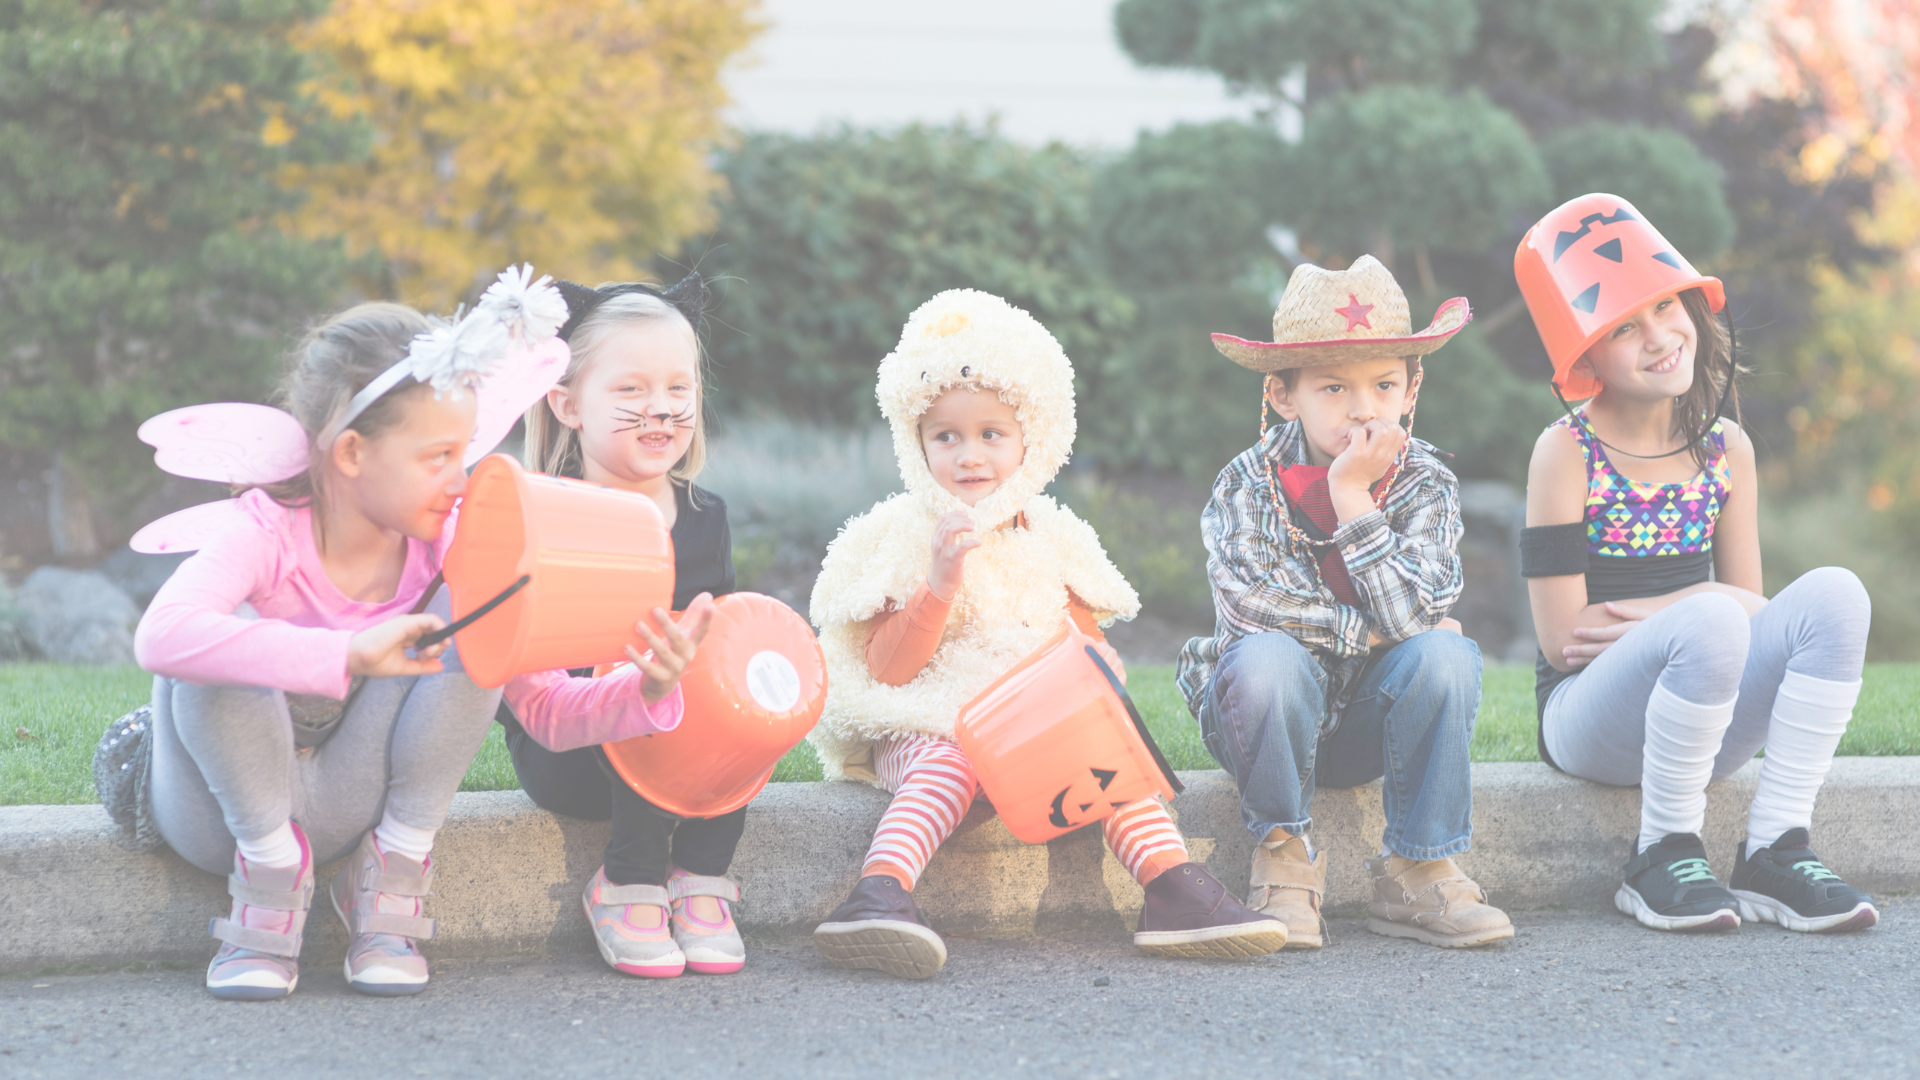 Photo: “Trick or treaters sitting on a curb” by FatCamera. Five kids dressed up sitting on a curb.